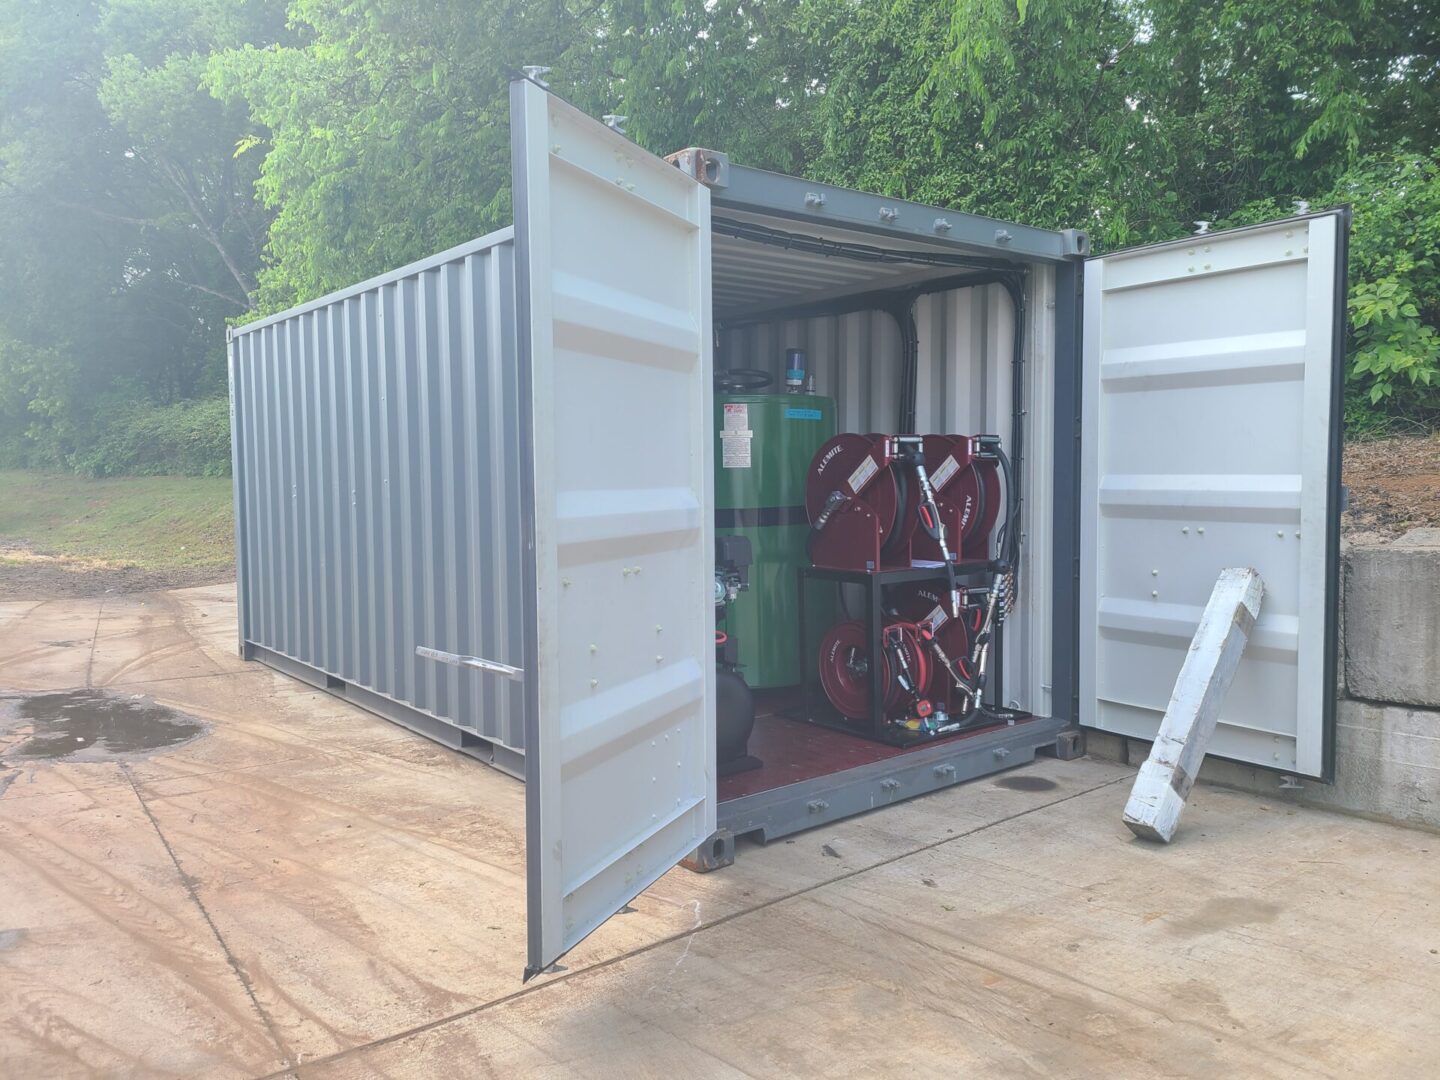 A container with two large doors open on the ground.